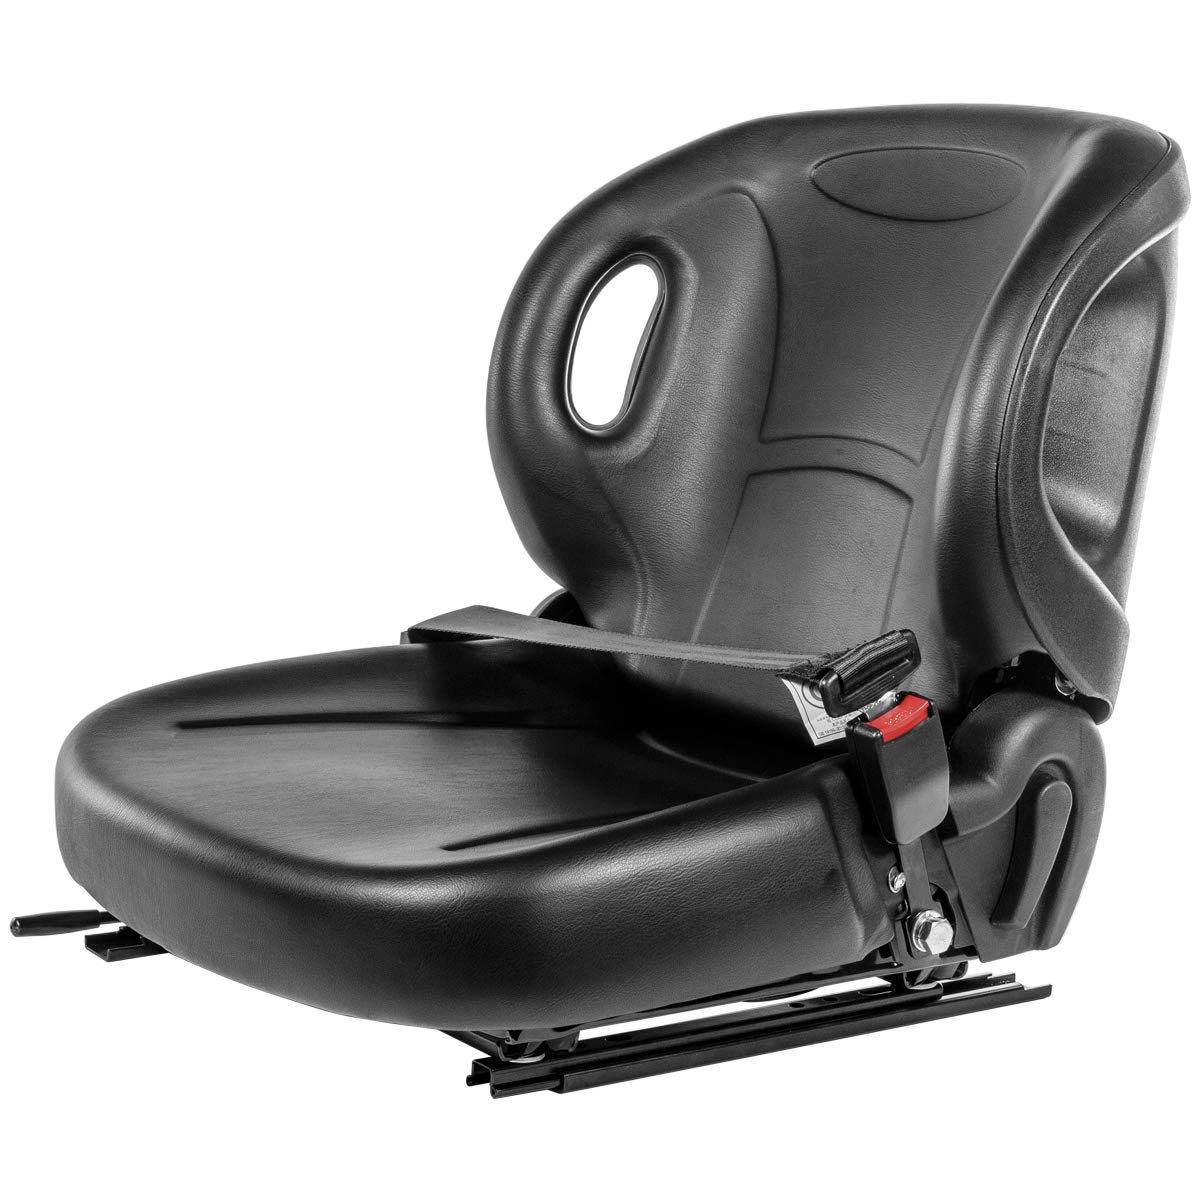 New Delivery for Seat Leon Air Ride - YY51 Forklift Seat – Qinglin Seat